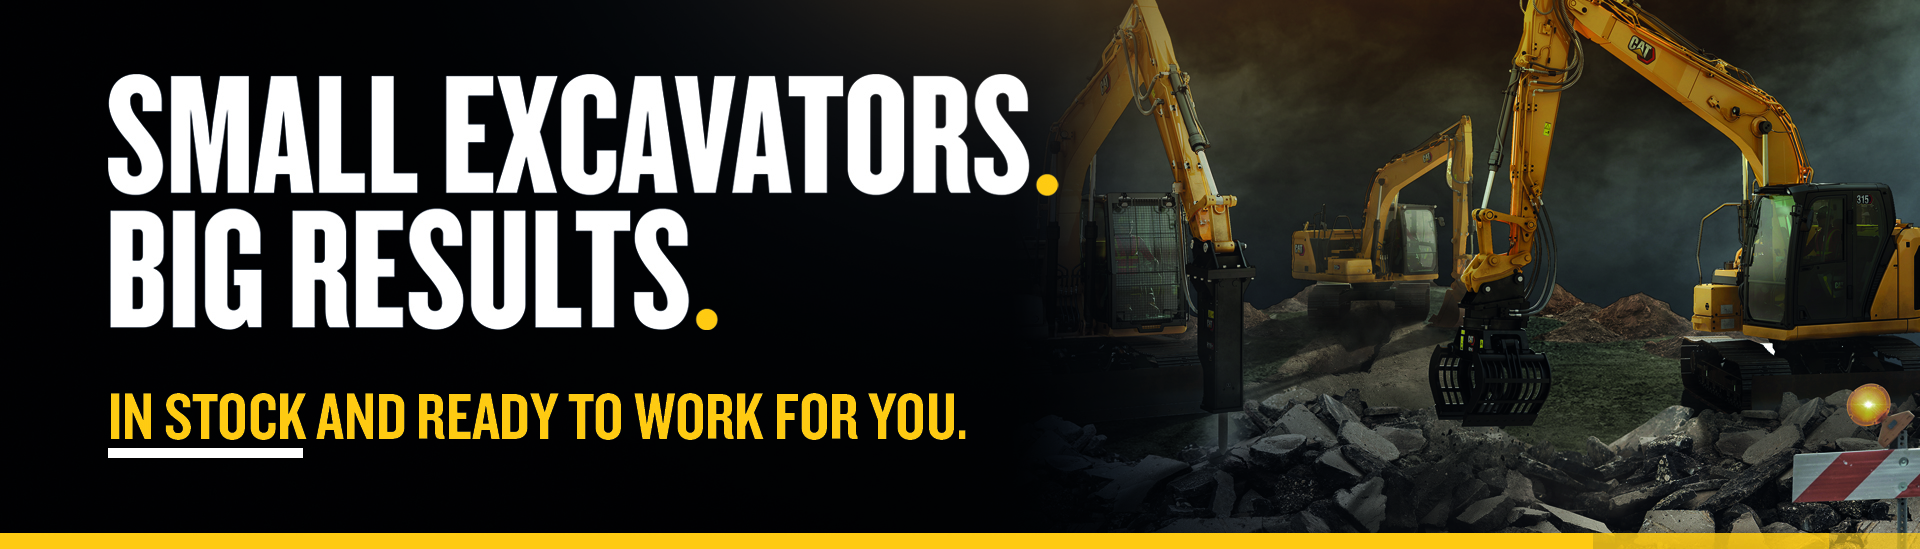 Small Excavators. Big Results. In stock and ready to work with you.